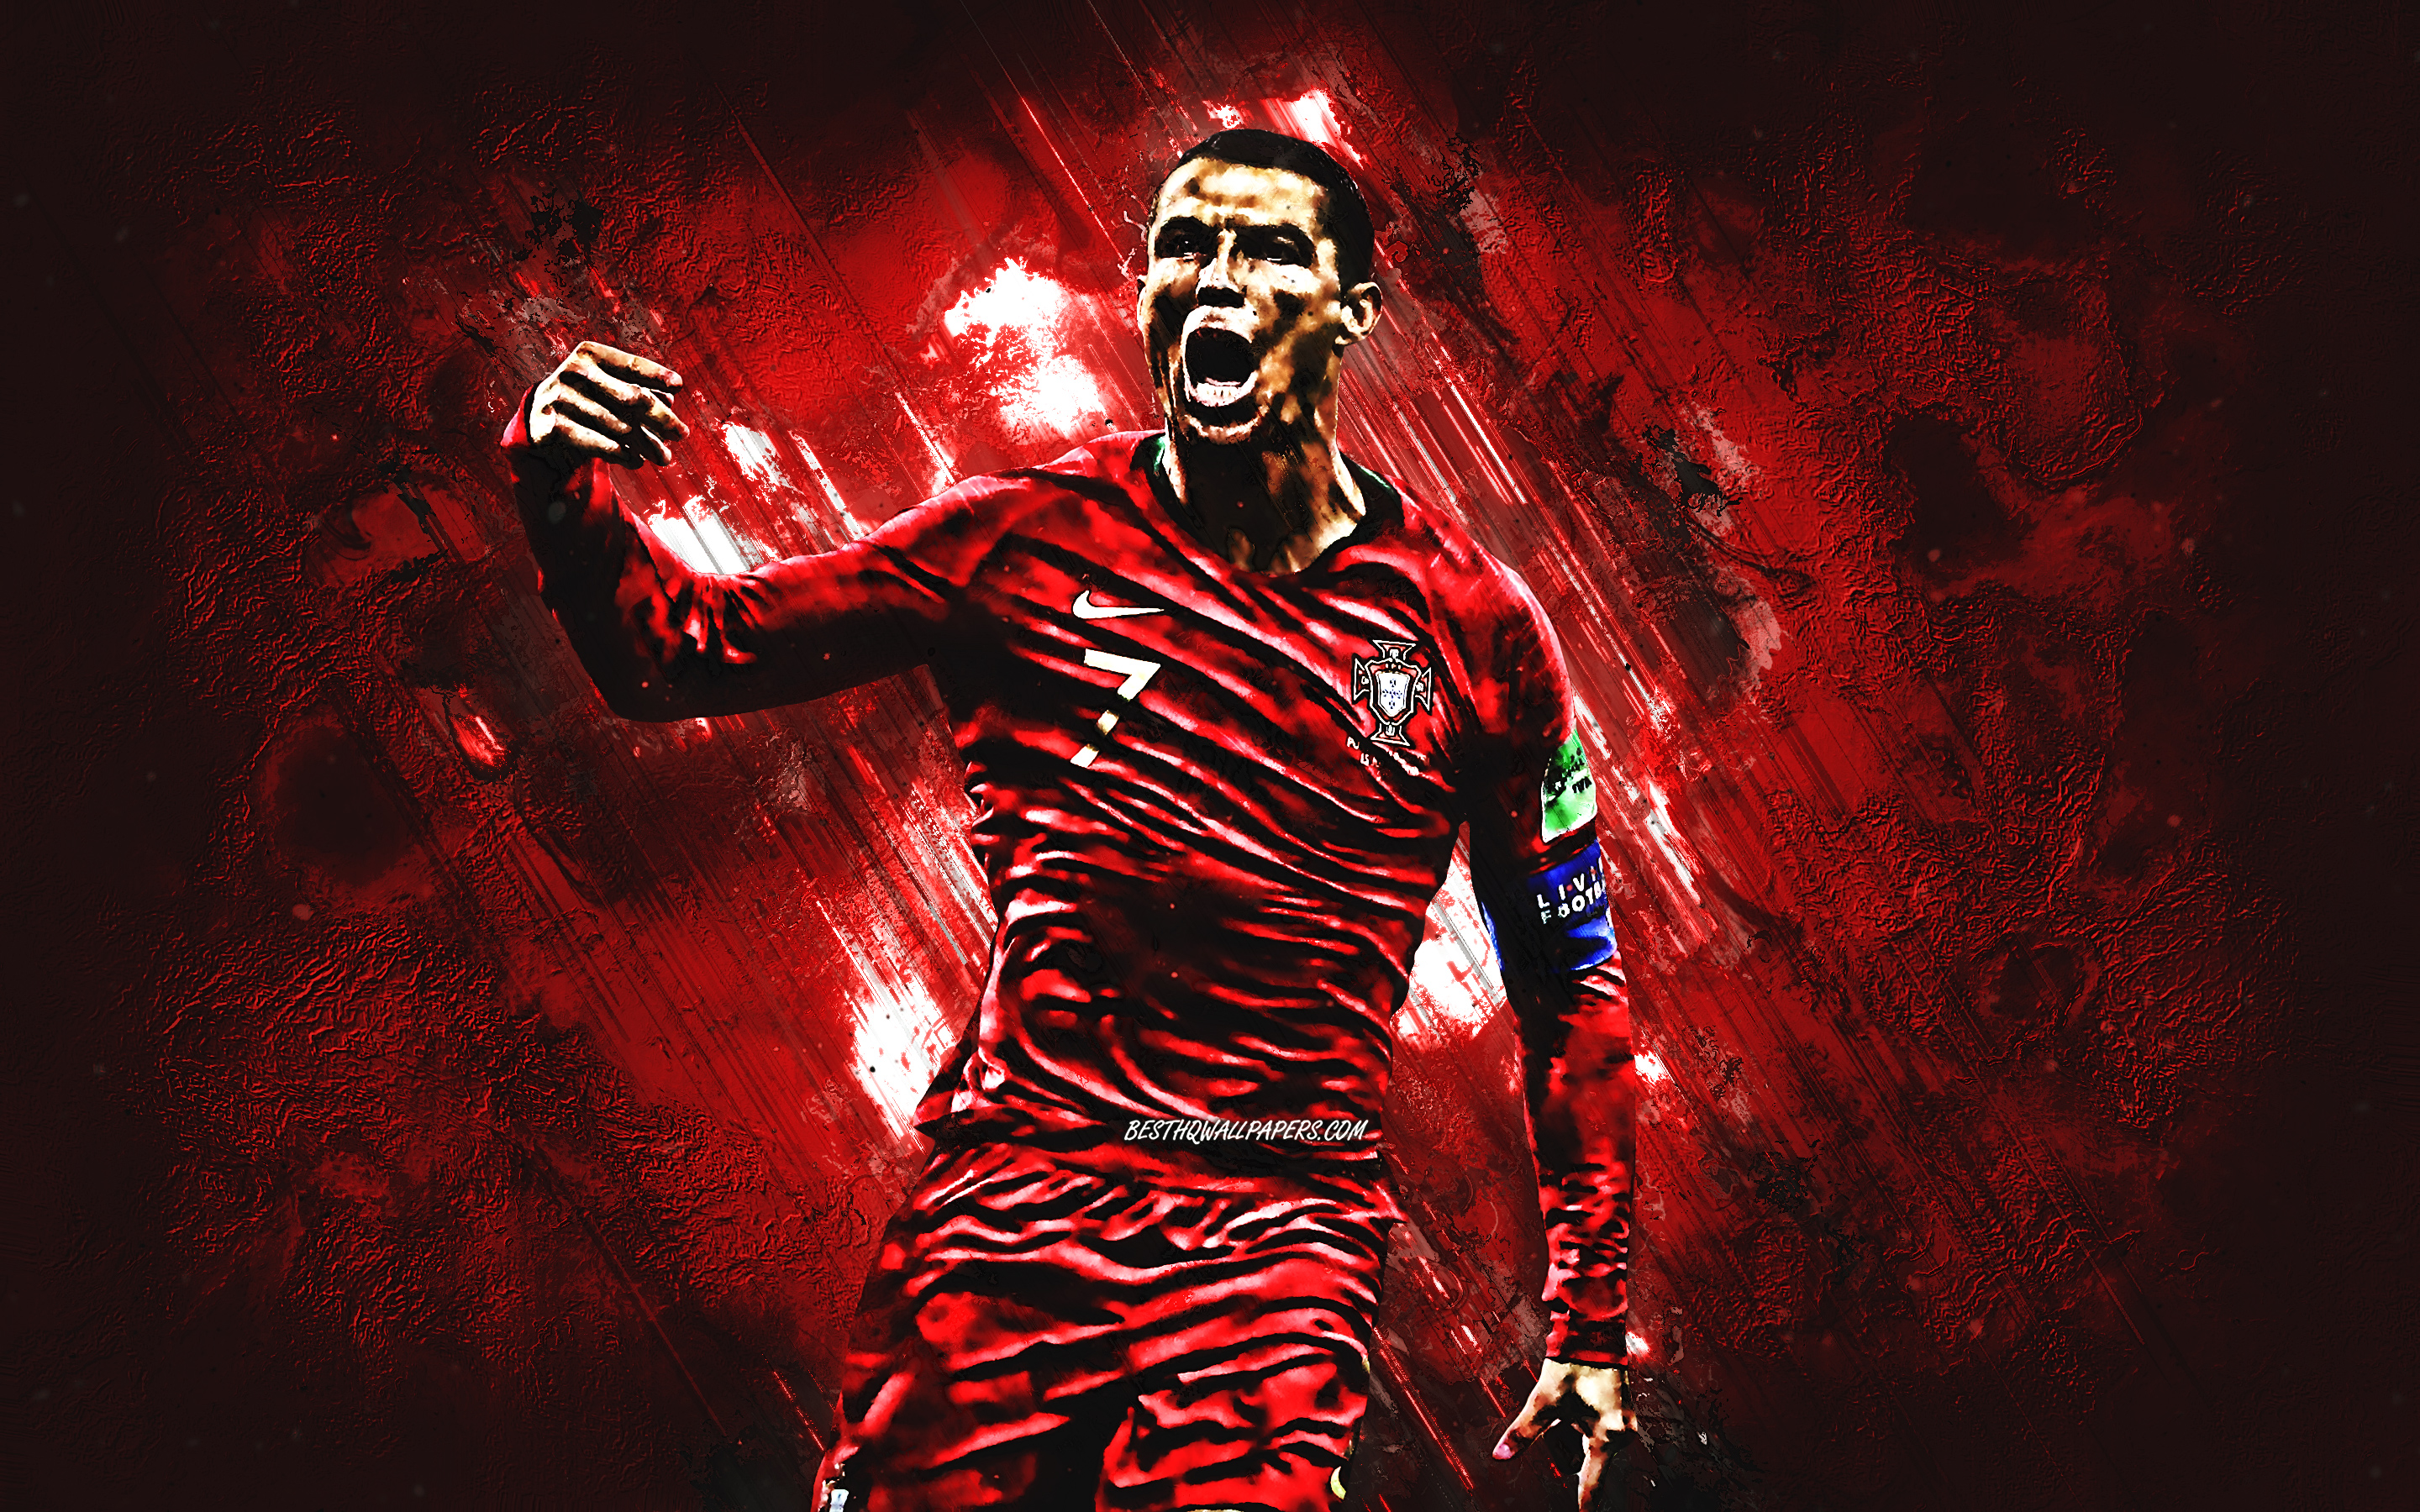 Download wallpaper Cristiano Ronaldo, Portugal national football team, CR striker, red stone, 7 number, portrait, famous footballers, football, Portuguese footballers, grunge, Portugal for desktop with resolution 2880x1800. High Quality HD picture